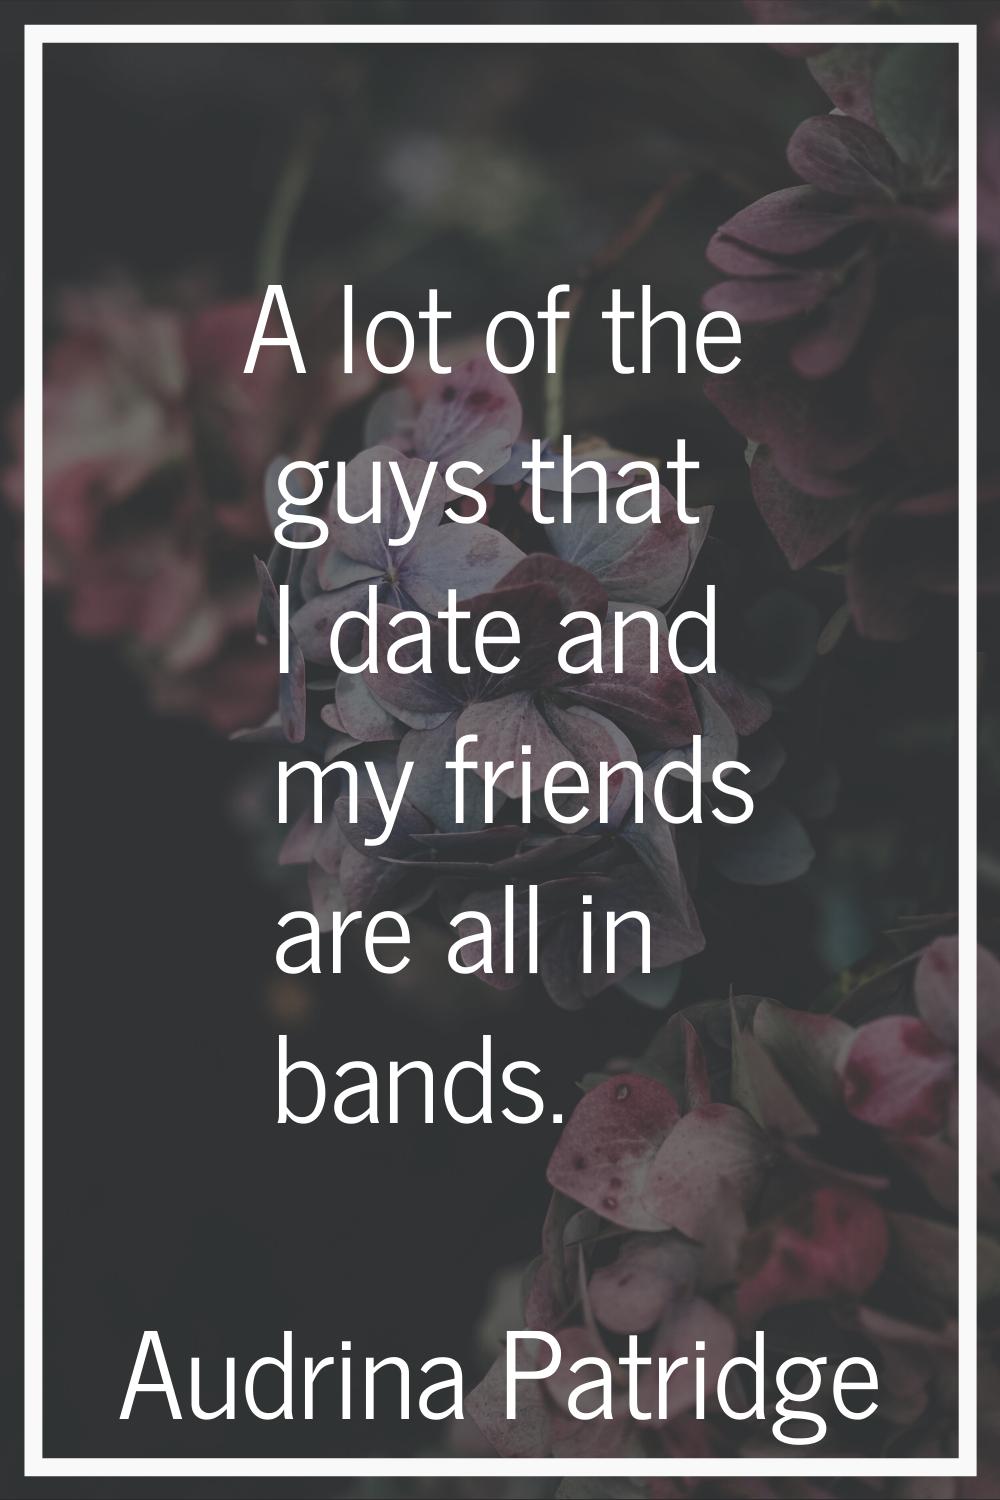 A lot of the guys that I date and my friends are all in bands.